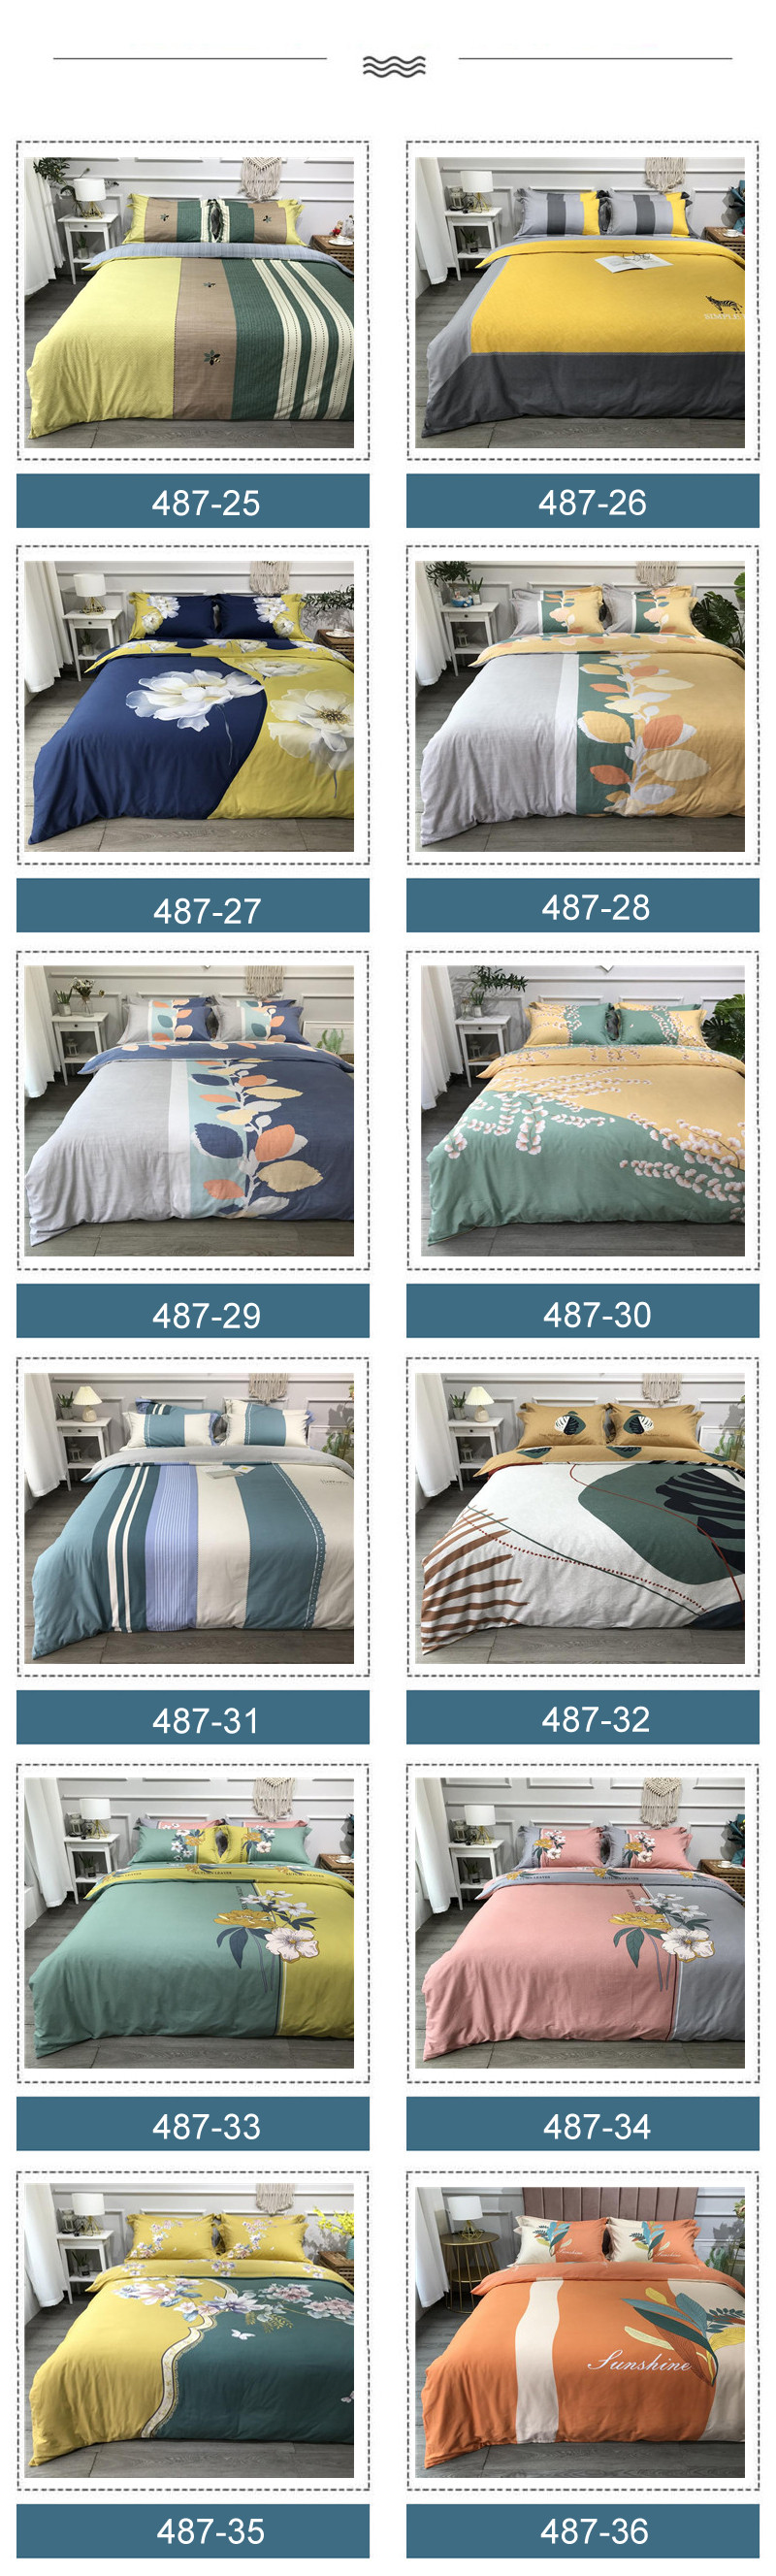 Low Price Bed Linens Home